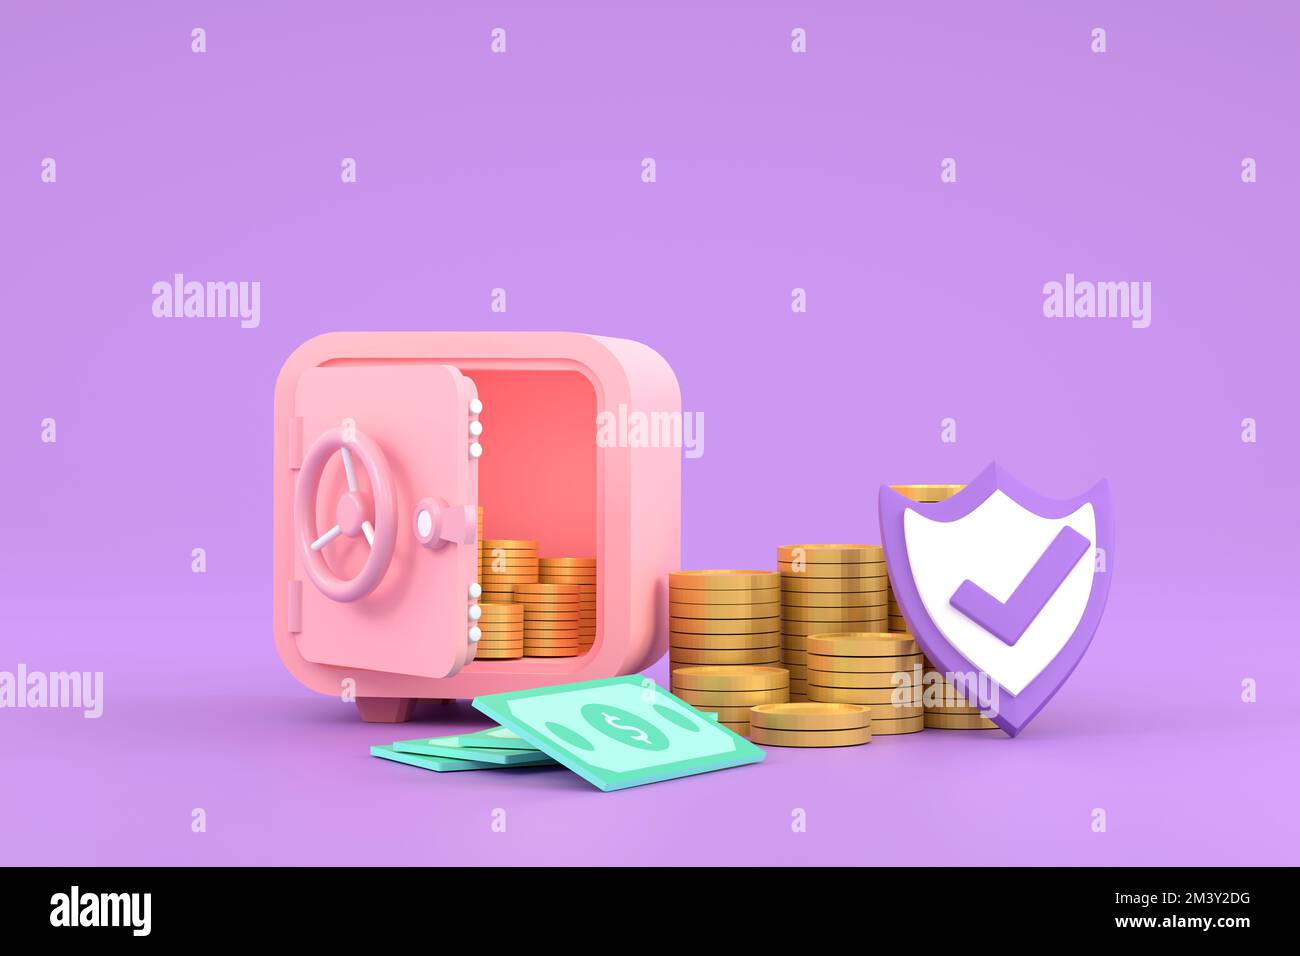 3D. safe, coins and banknotes for symbol business saving. Stock Photo